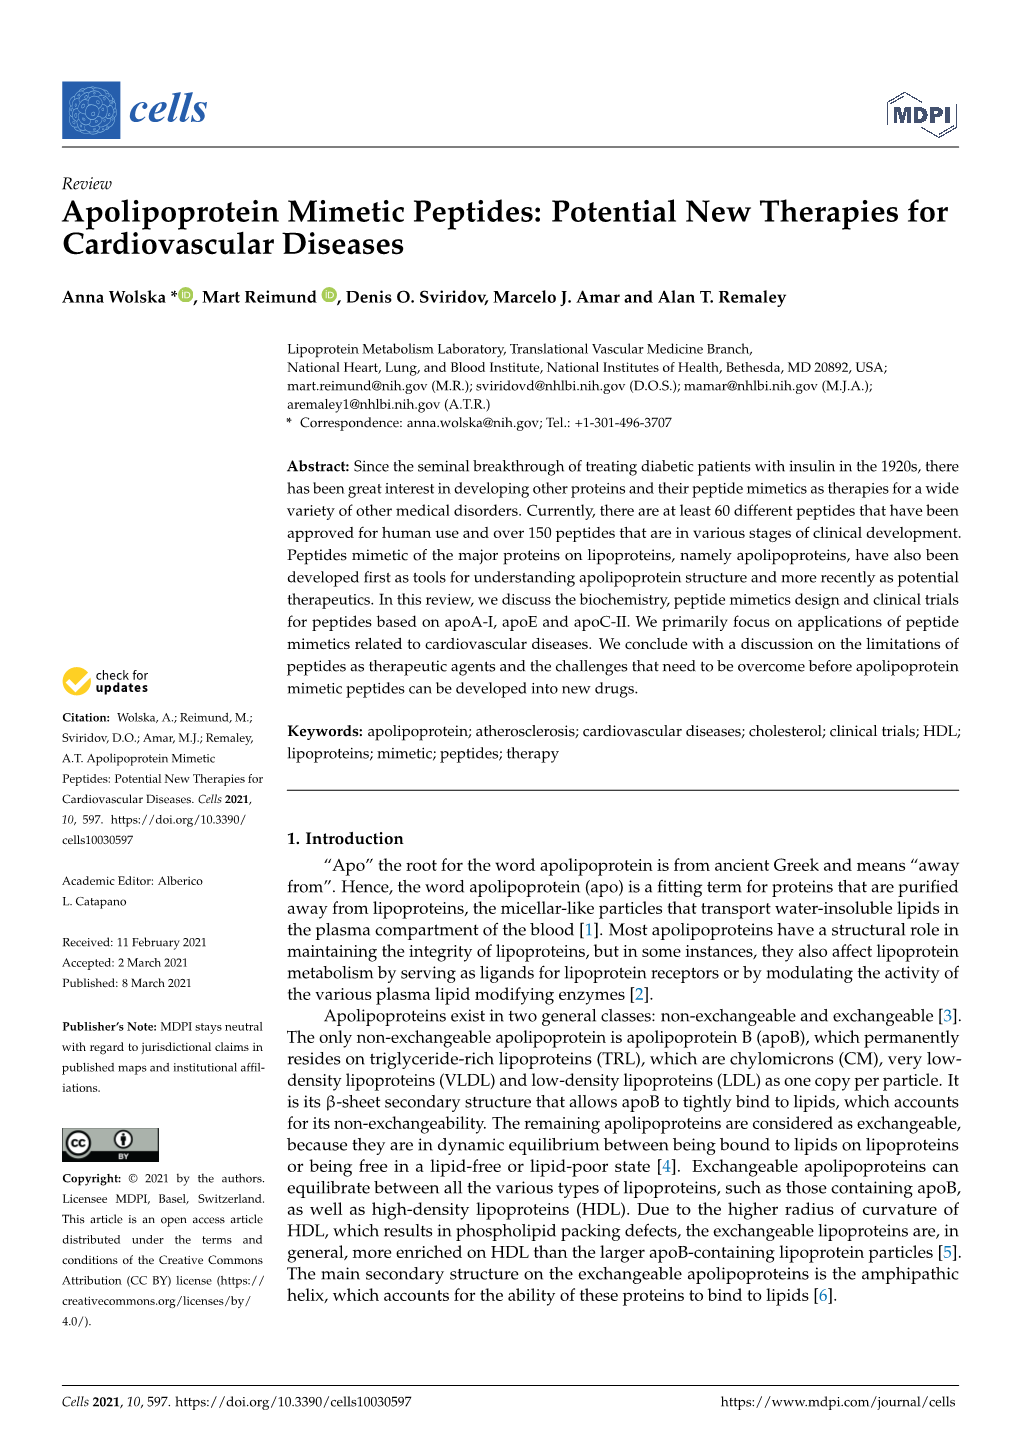 Apolipoprotein Mimetic Peptides: Potential New Therapies for Cardiovascular Diseases